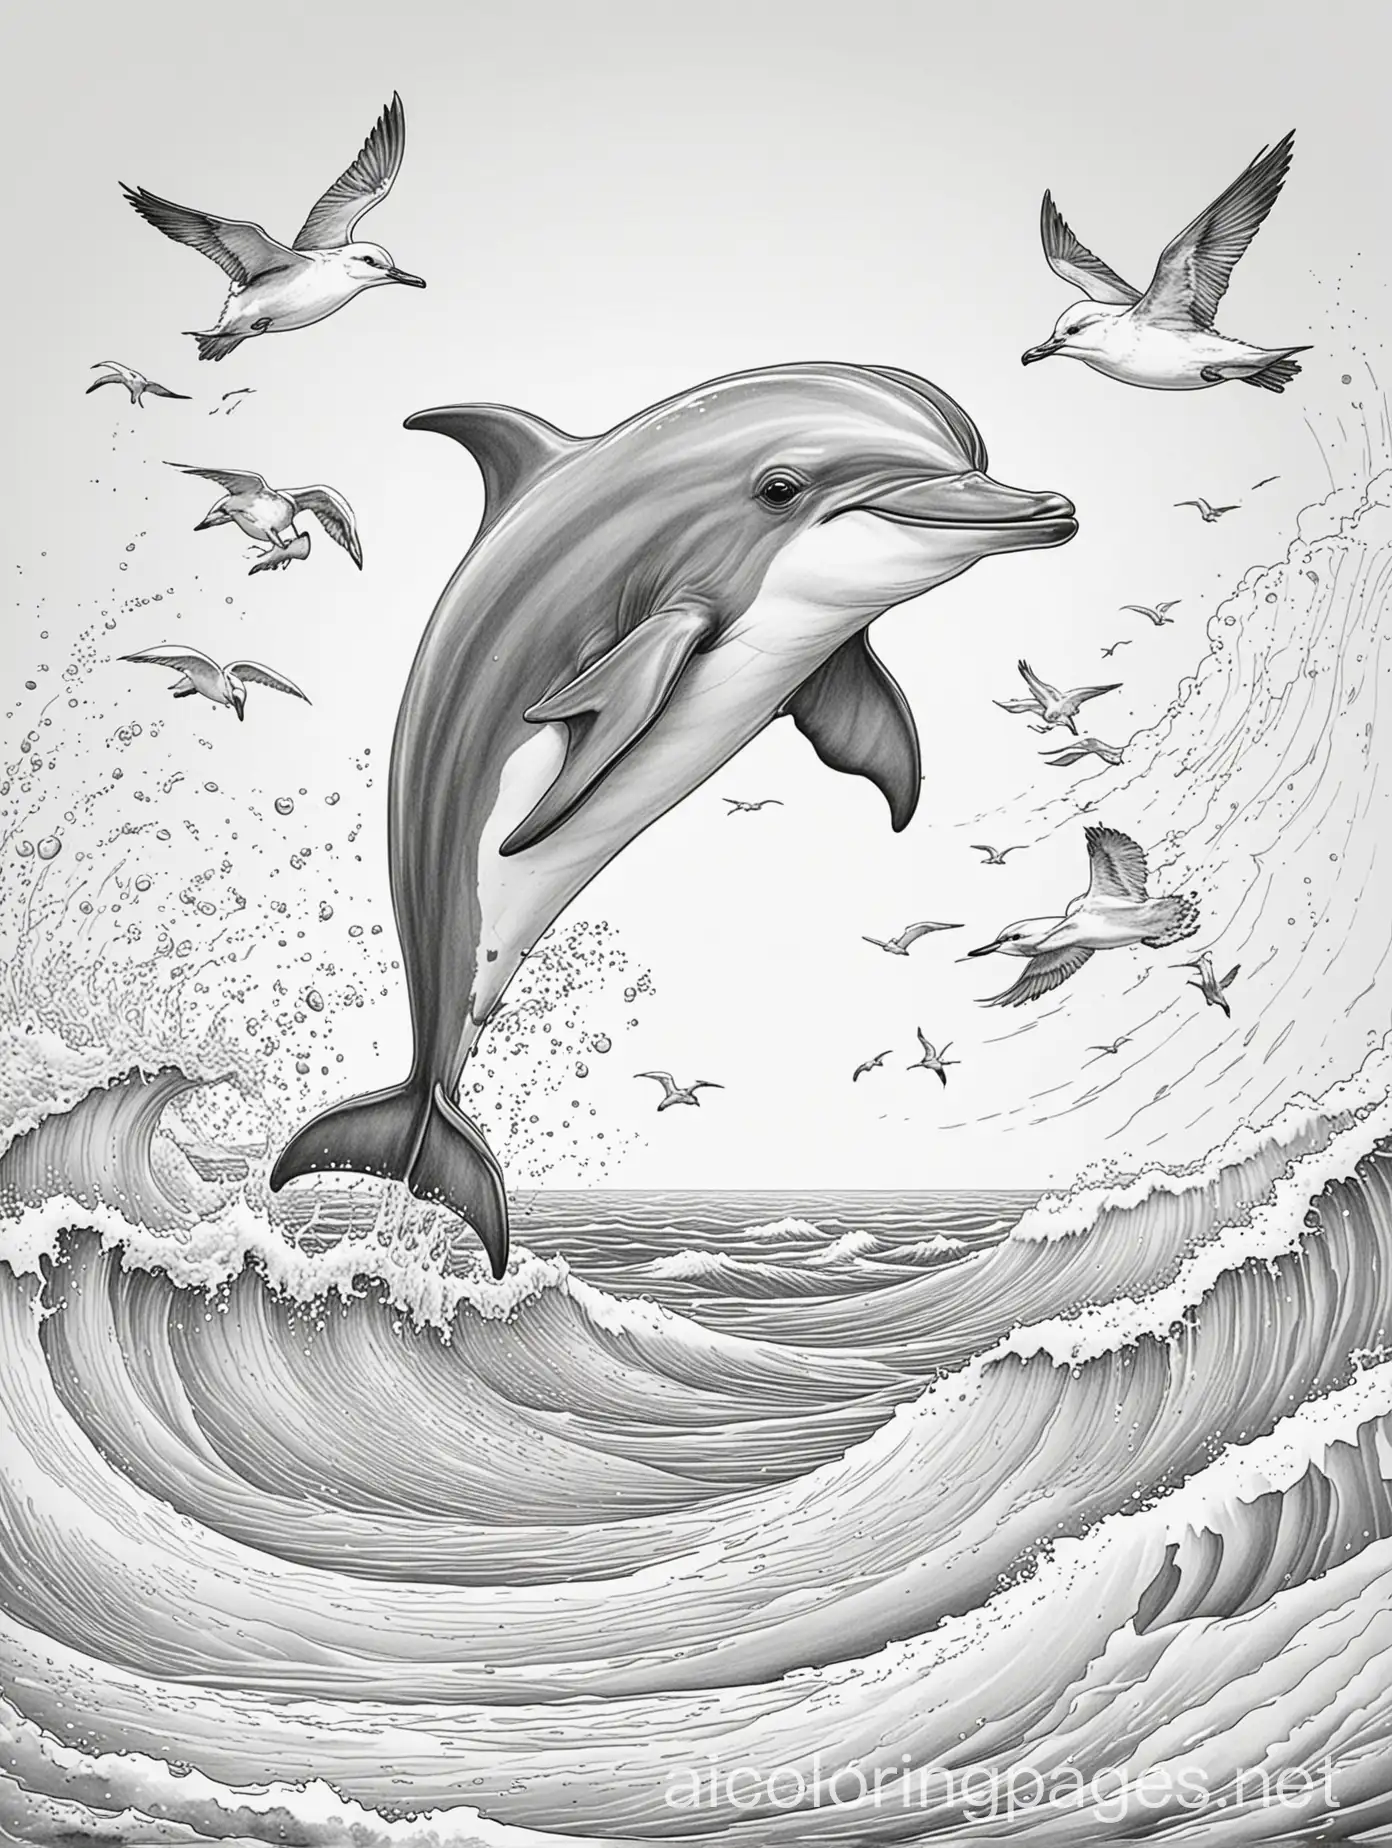 Cute dolphin leaping out of the ocean waves under a clear blue sky with seagulls flying overhead scene , Coloring Page, black and white, line art, plain white background, Simplicity, Ample White Space. The background of the coloring page is plain white to make it easy for young children to color within the lines. The outlines of all the subjects are easy to distinguish, making it simple for kids to color without too much difficulty, Coloring Page, black and white, line art, white background, Simplicity, Ample White Space. The background of the coloring page is plain white to make it easy for young children to color within the lines. The outlines of all the subjects are easy to distinguish, making it simple for kids to color without too much difficulty